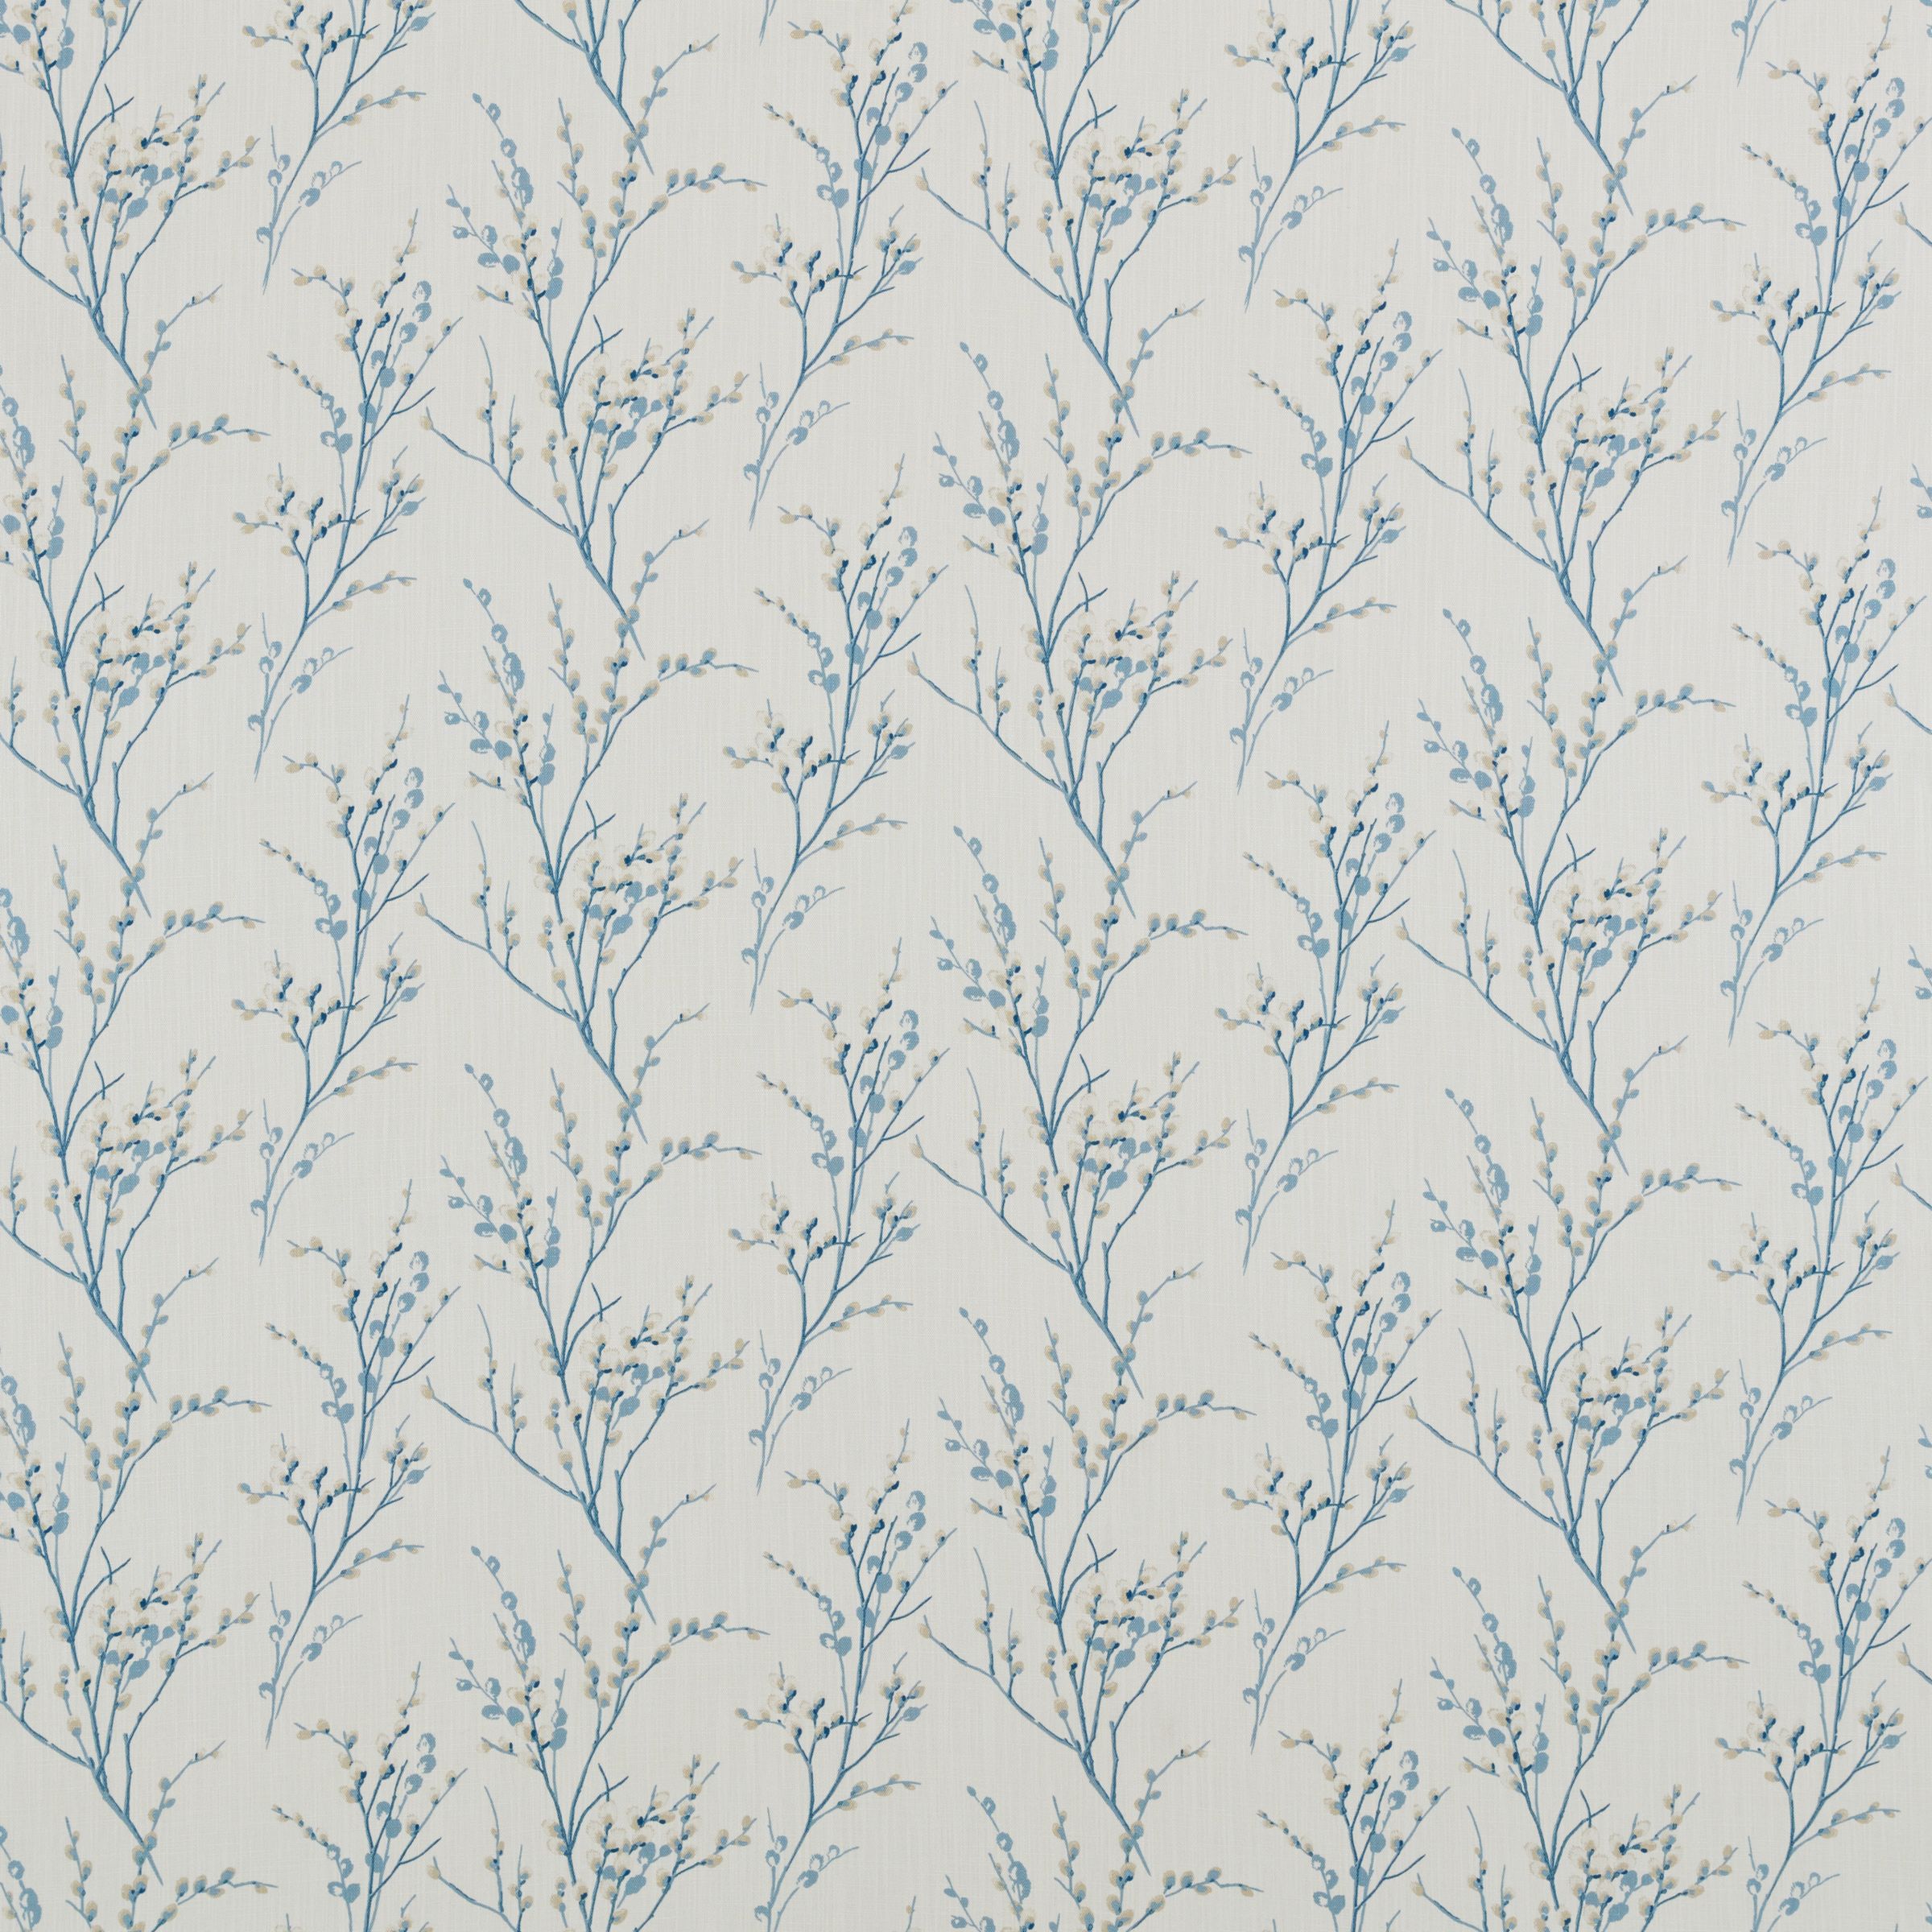 Laura Ashley Pussy Willow Made to Measure Curtains, Off White/Seaspray